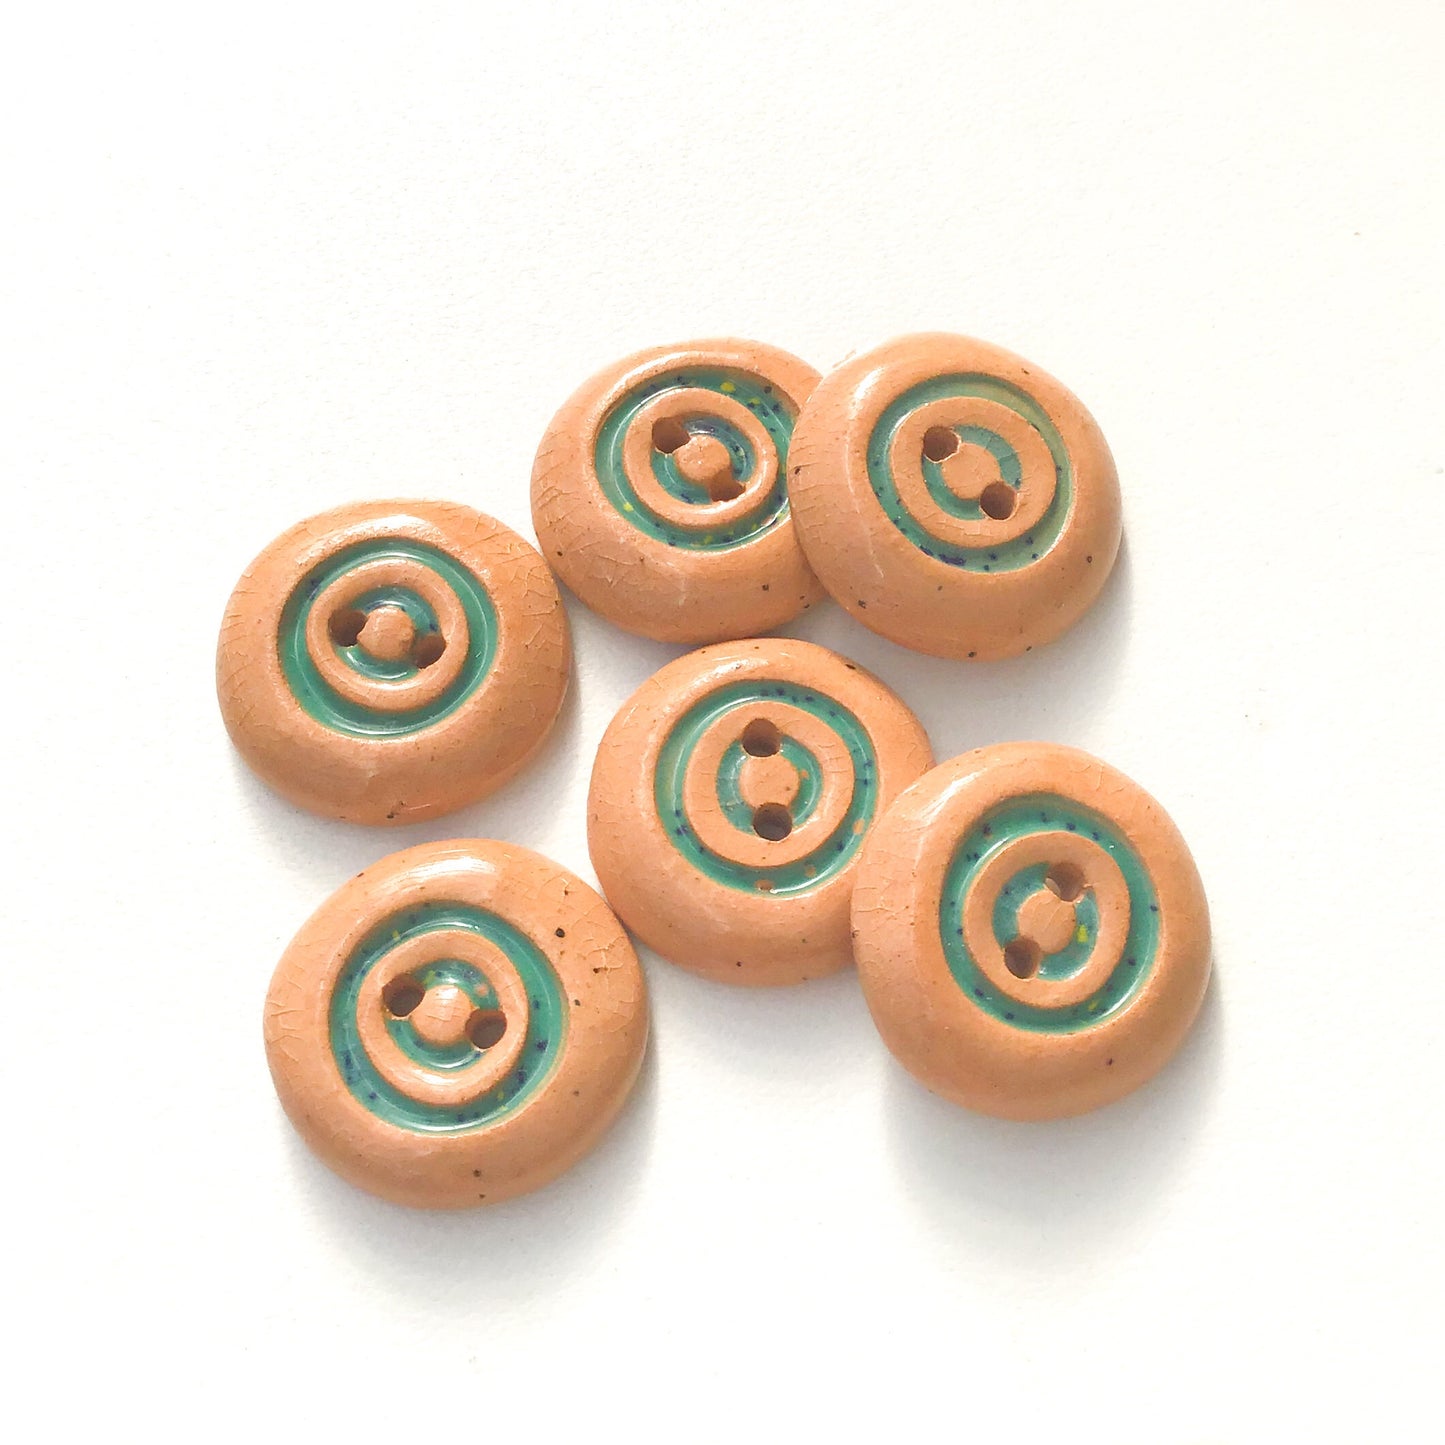 Turquoise Concentric Circle Ceramic Buttons on Brown Clay - 3/4" - 6 Pack